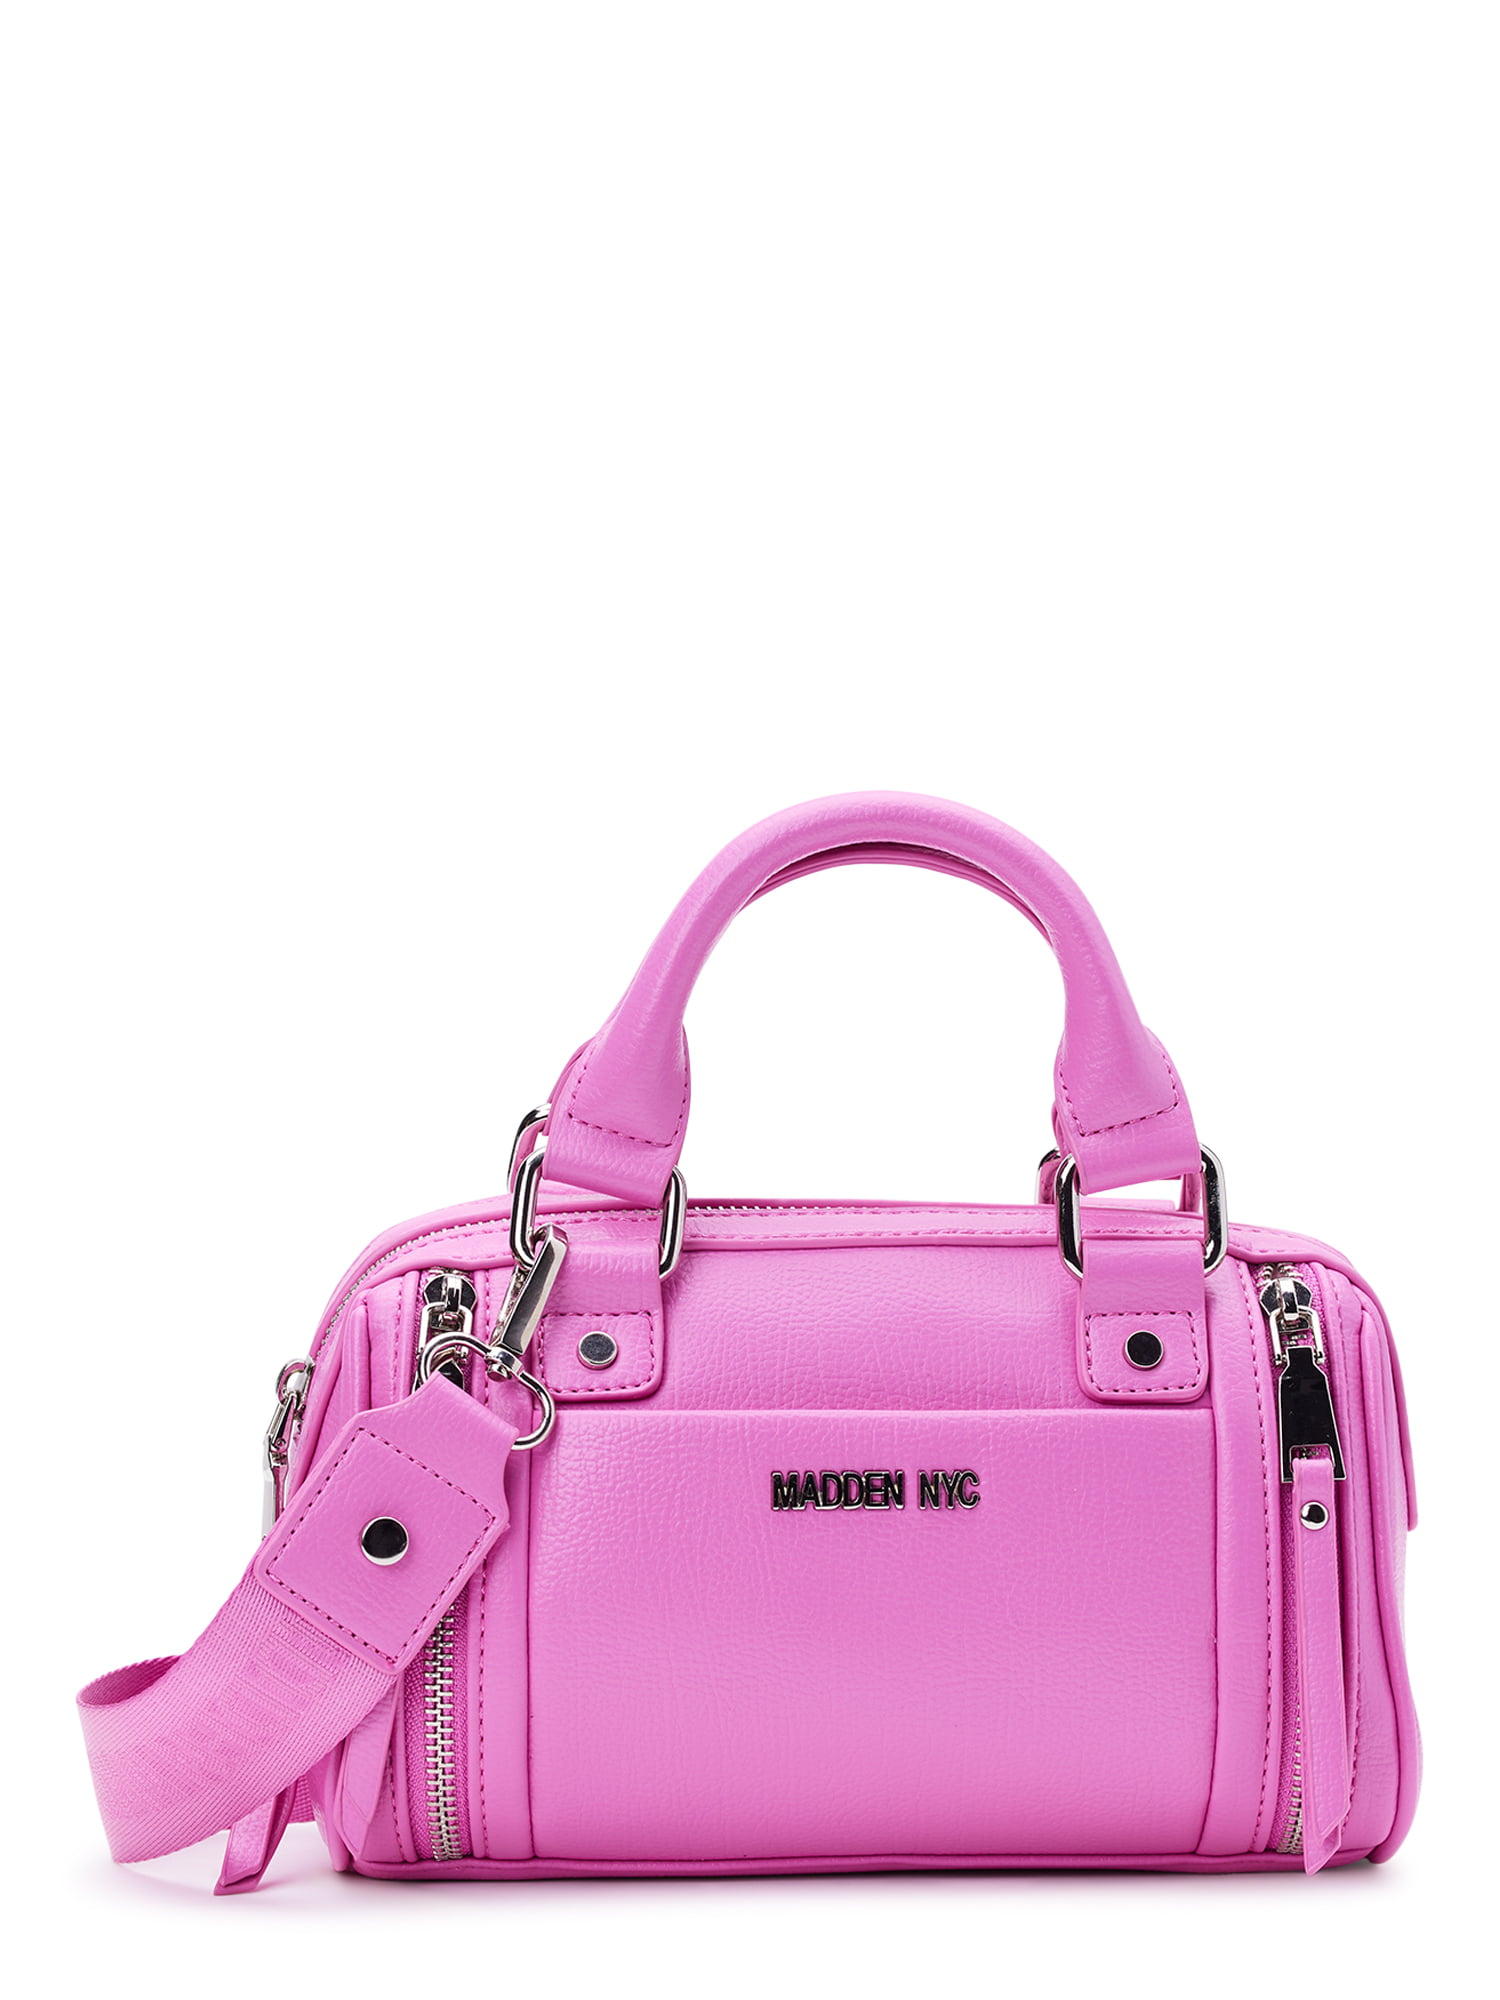 Women's Mini Star Bag in pink shearling with suede star | Golden Goose